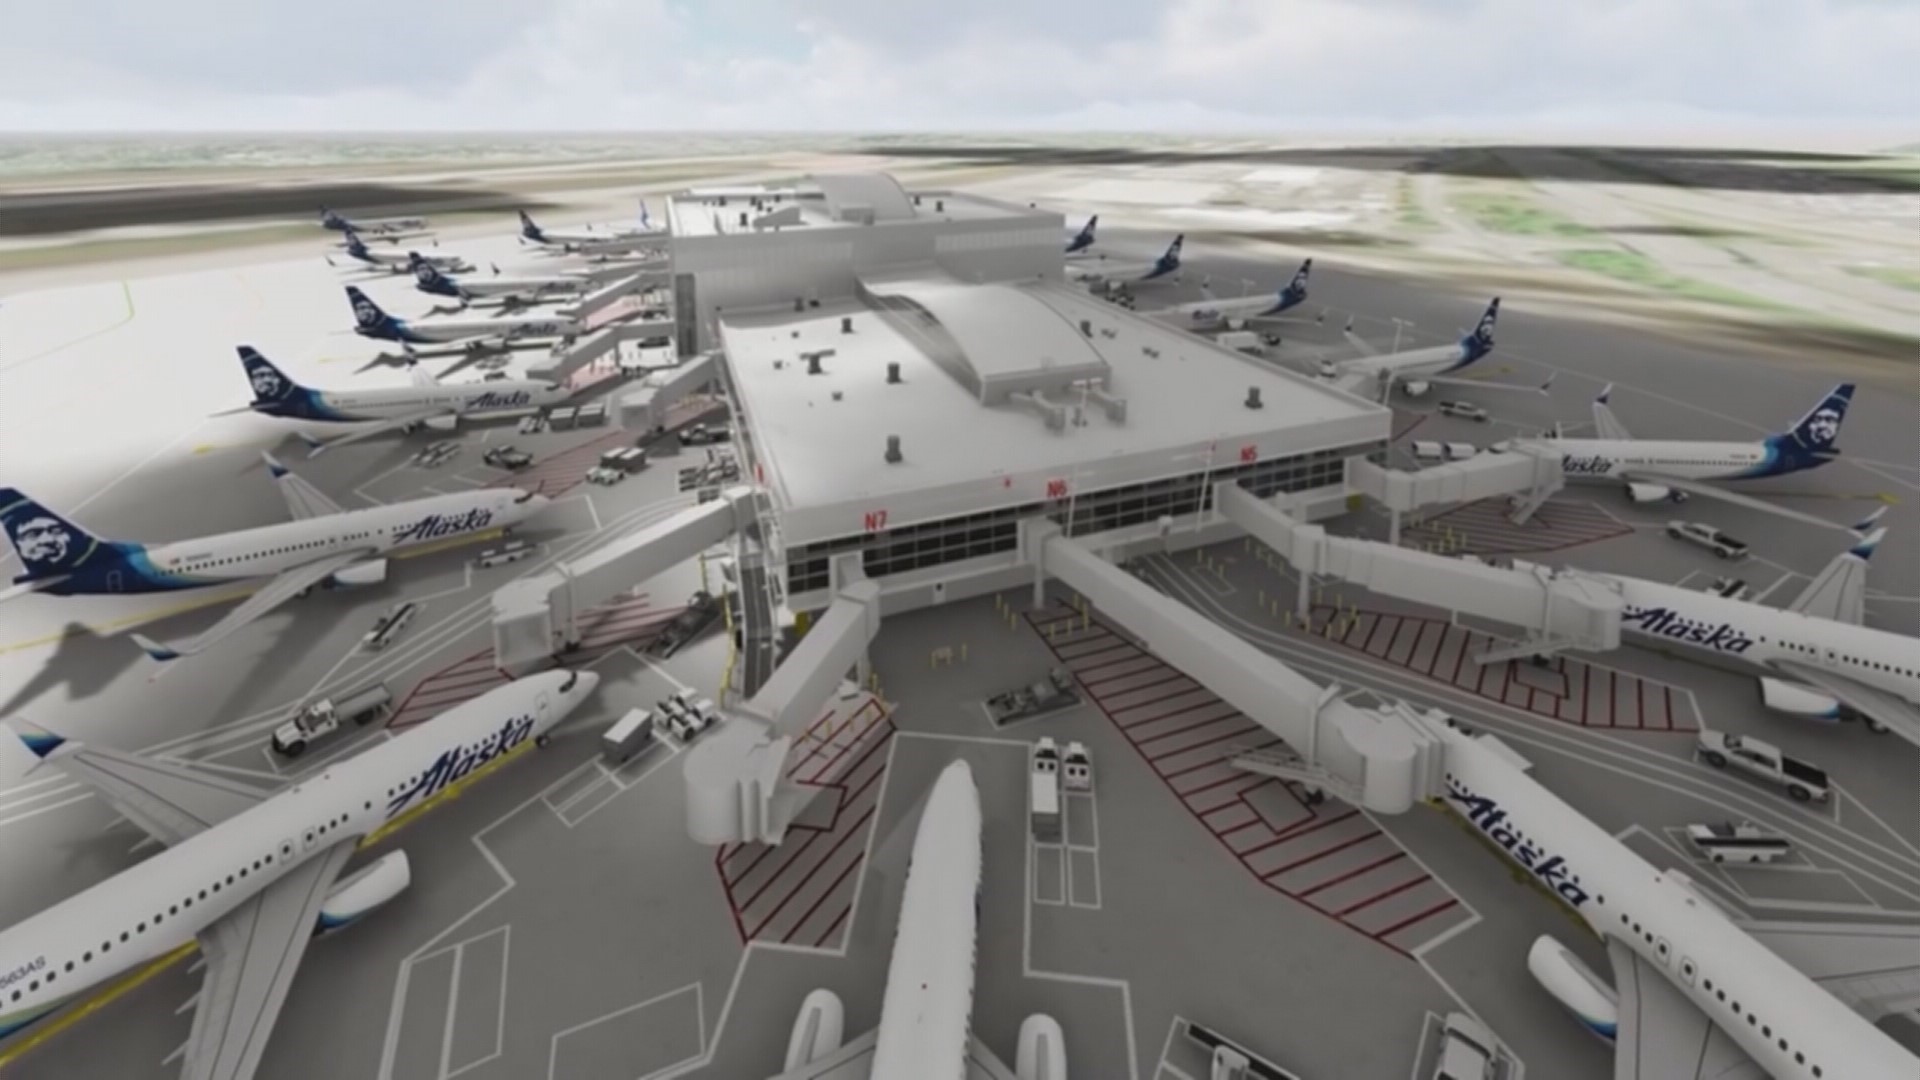 Phase 1 of Sea-Tac Airport's North Satellite opened in July 2019. Phase 2 is expected to open in 2021.